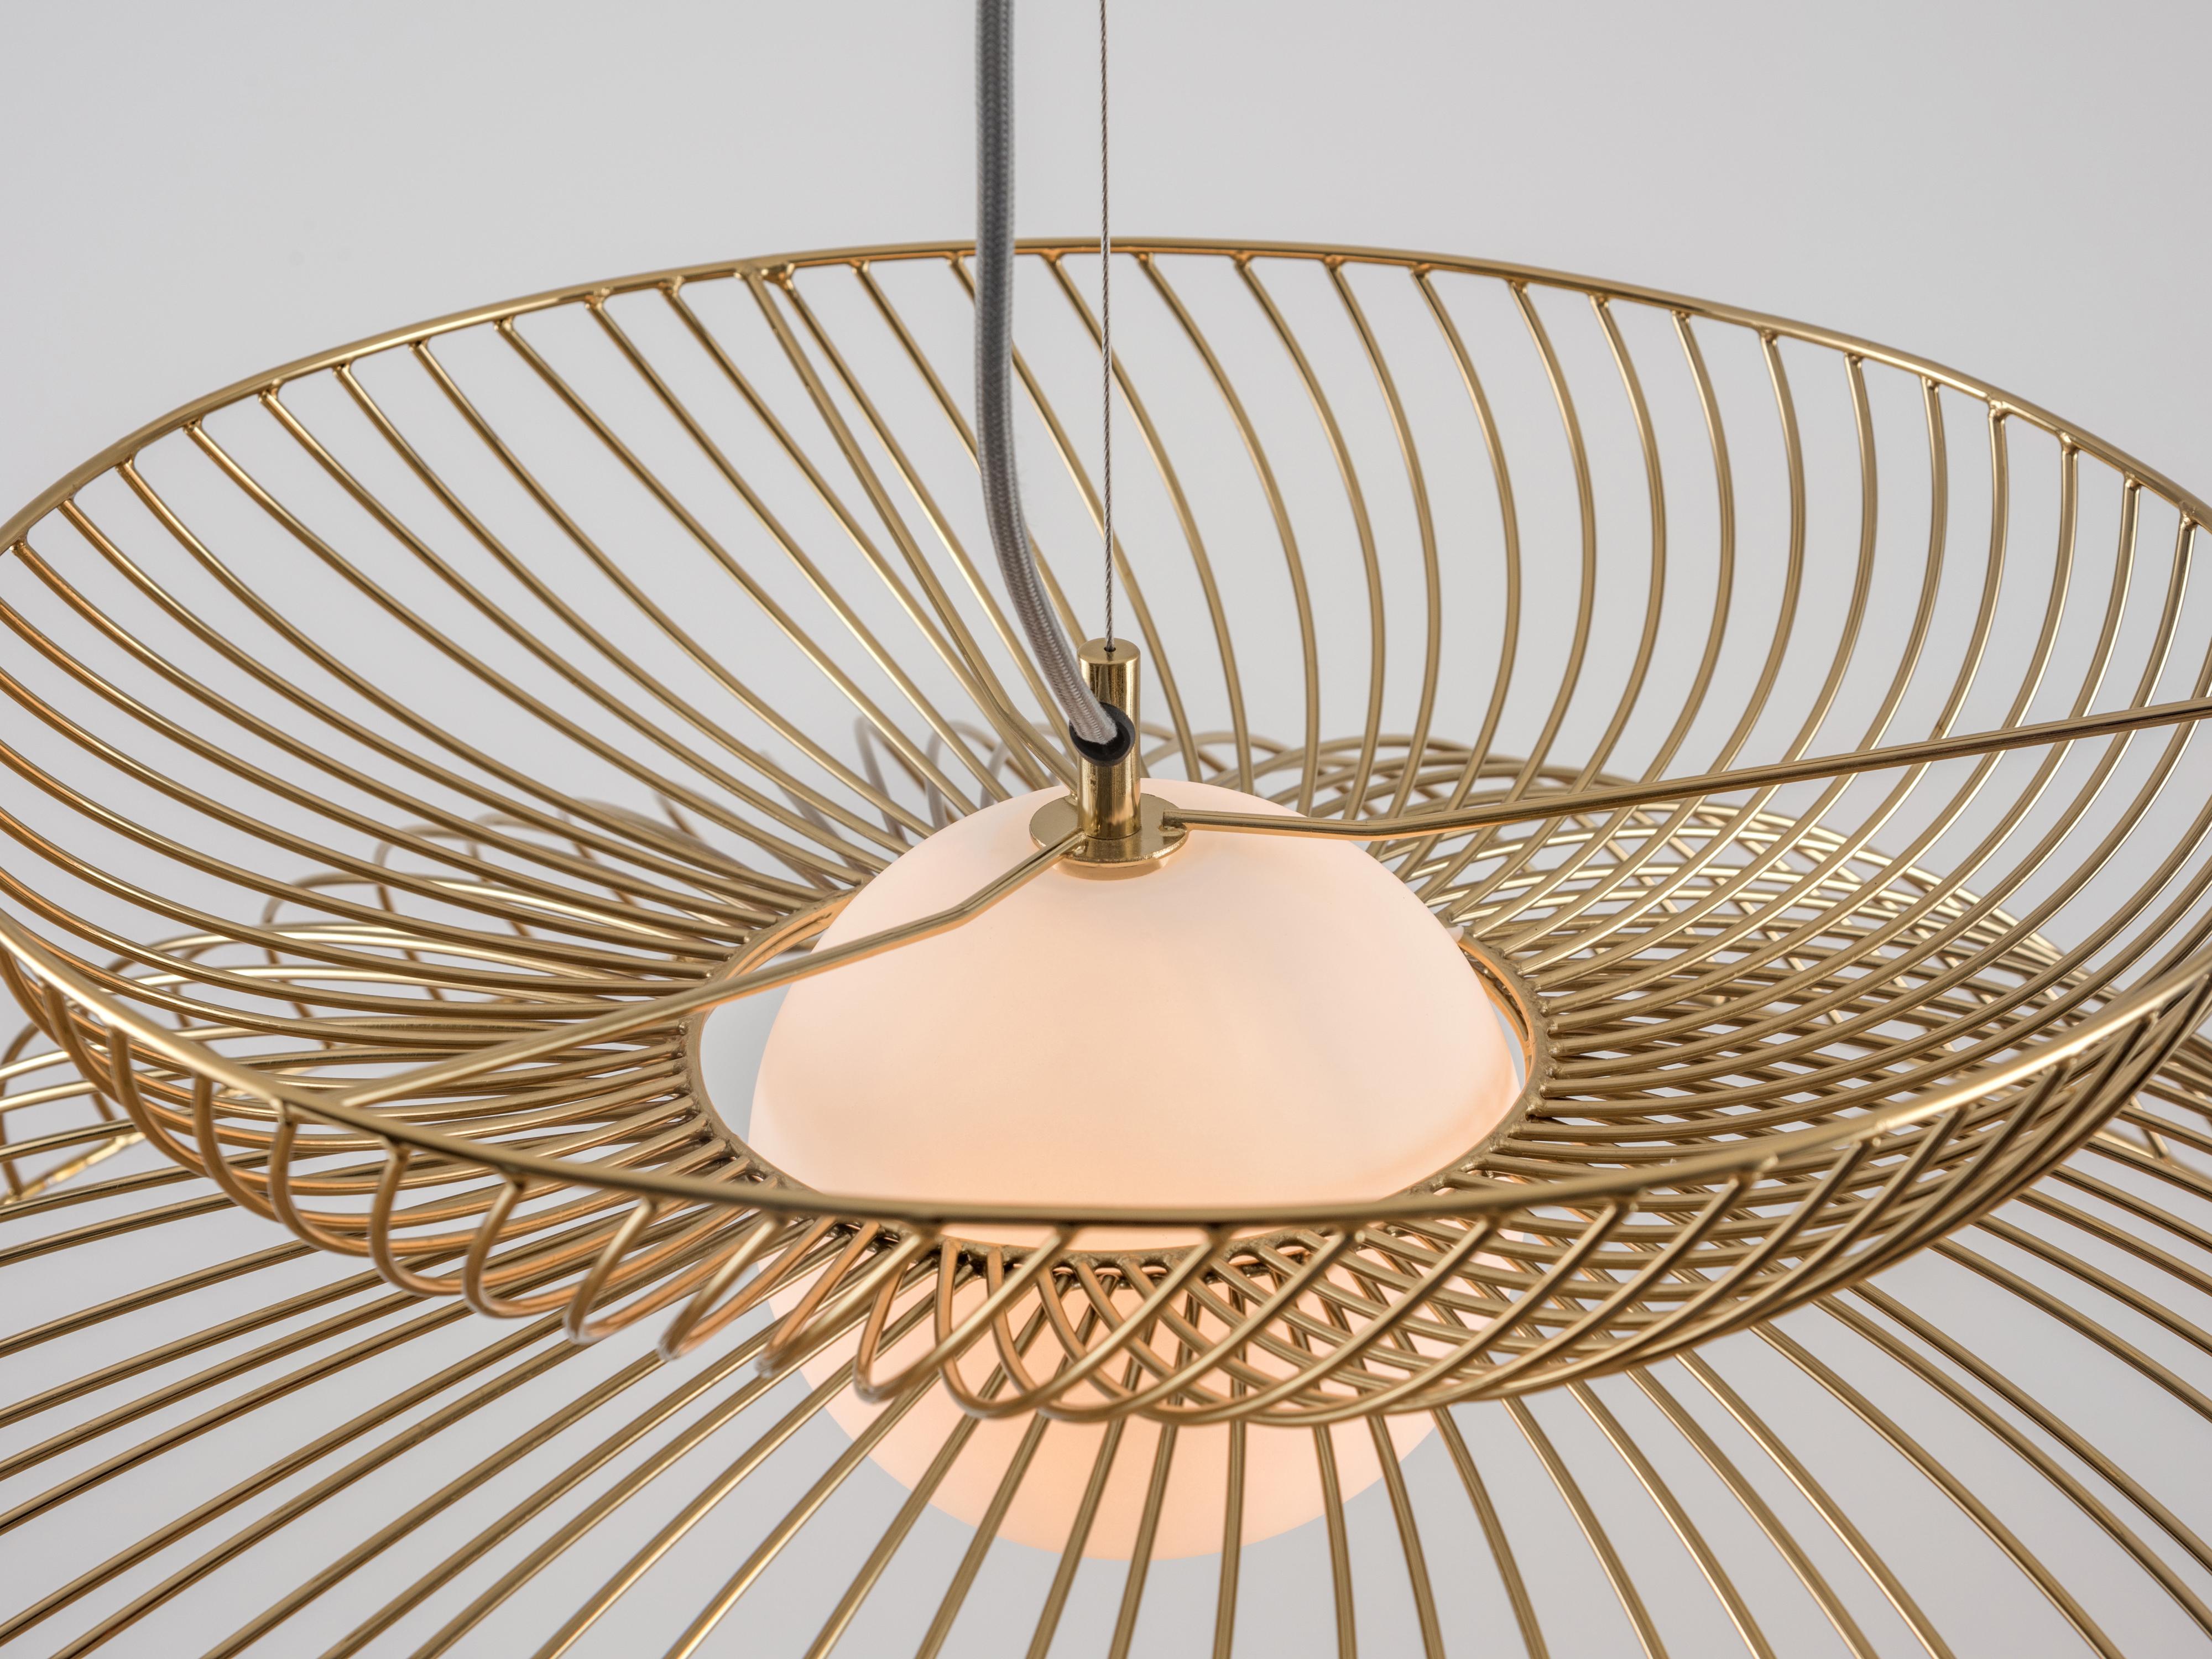 This bold statement light is perfect for a modern interior. The adjustable pendant wire suspends an opal glass shade and surrounding metal wire cage, which casts a wide atmospheric glow. Ideal for a dining space or room centrepiece. Or polished